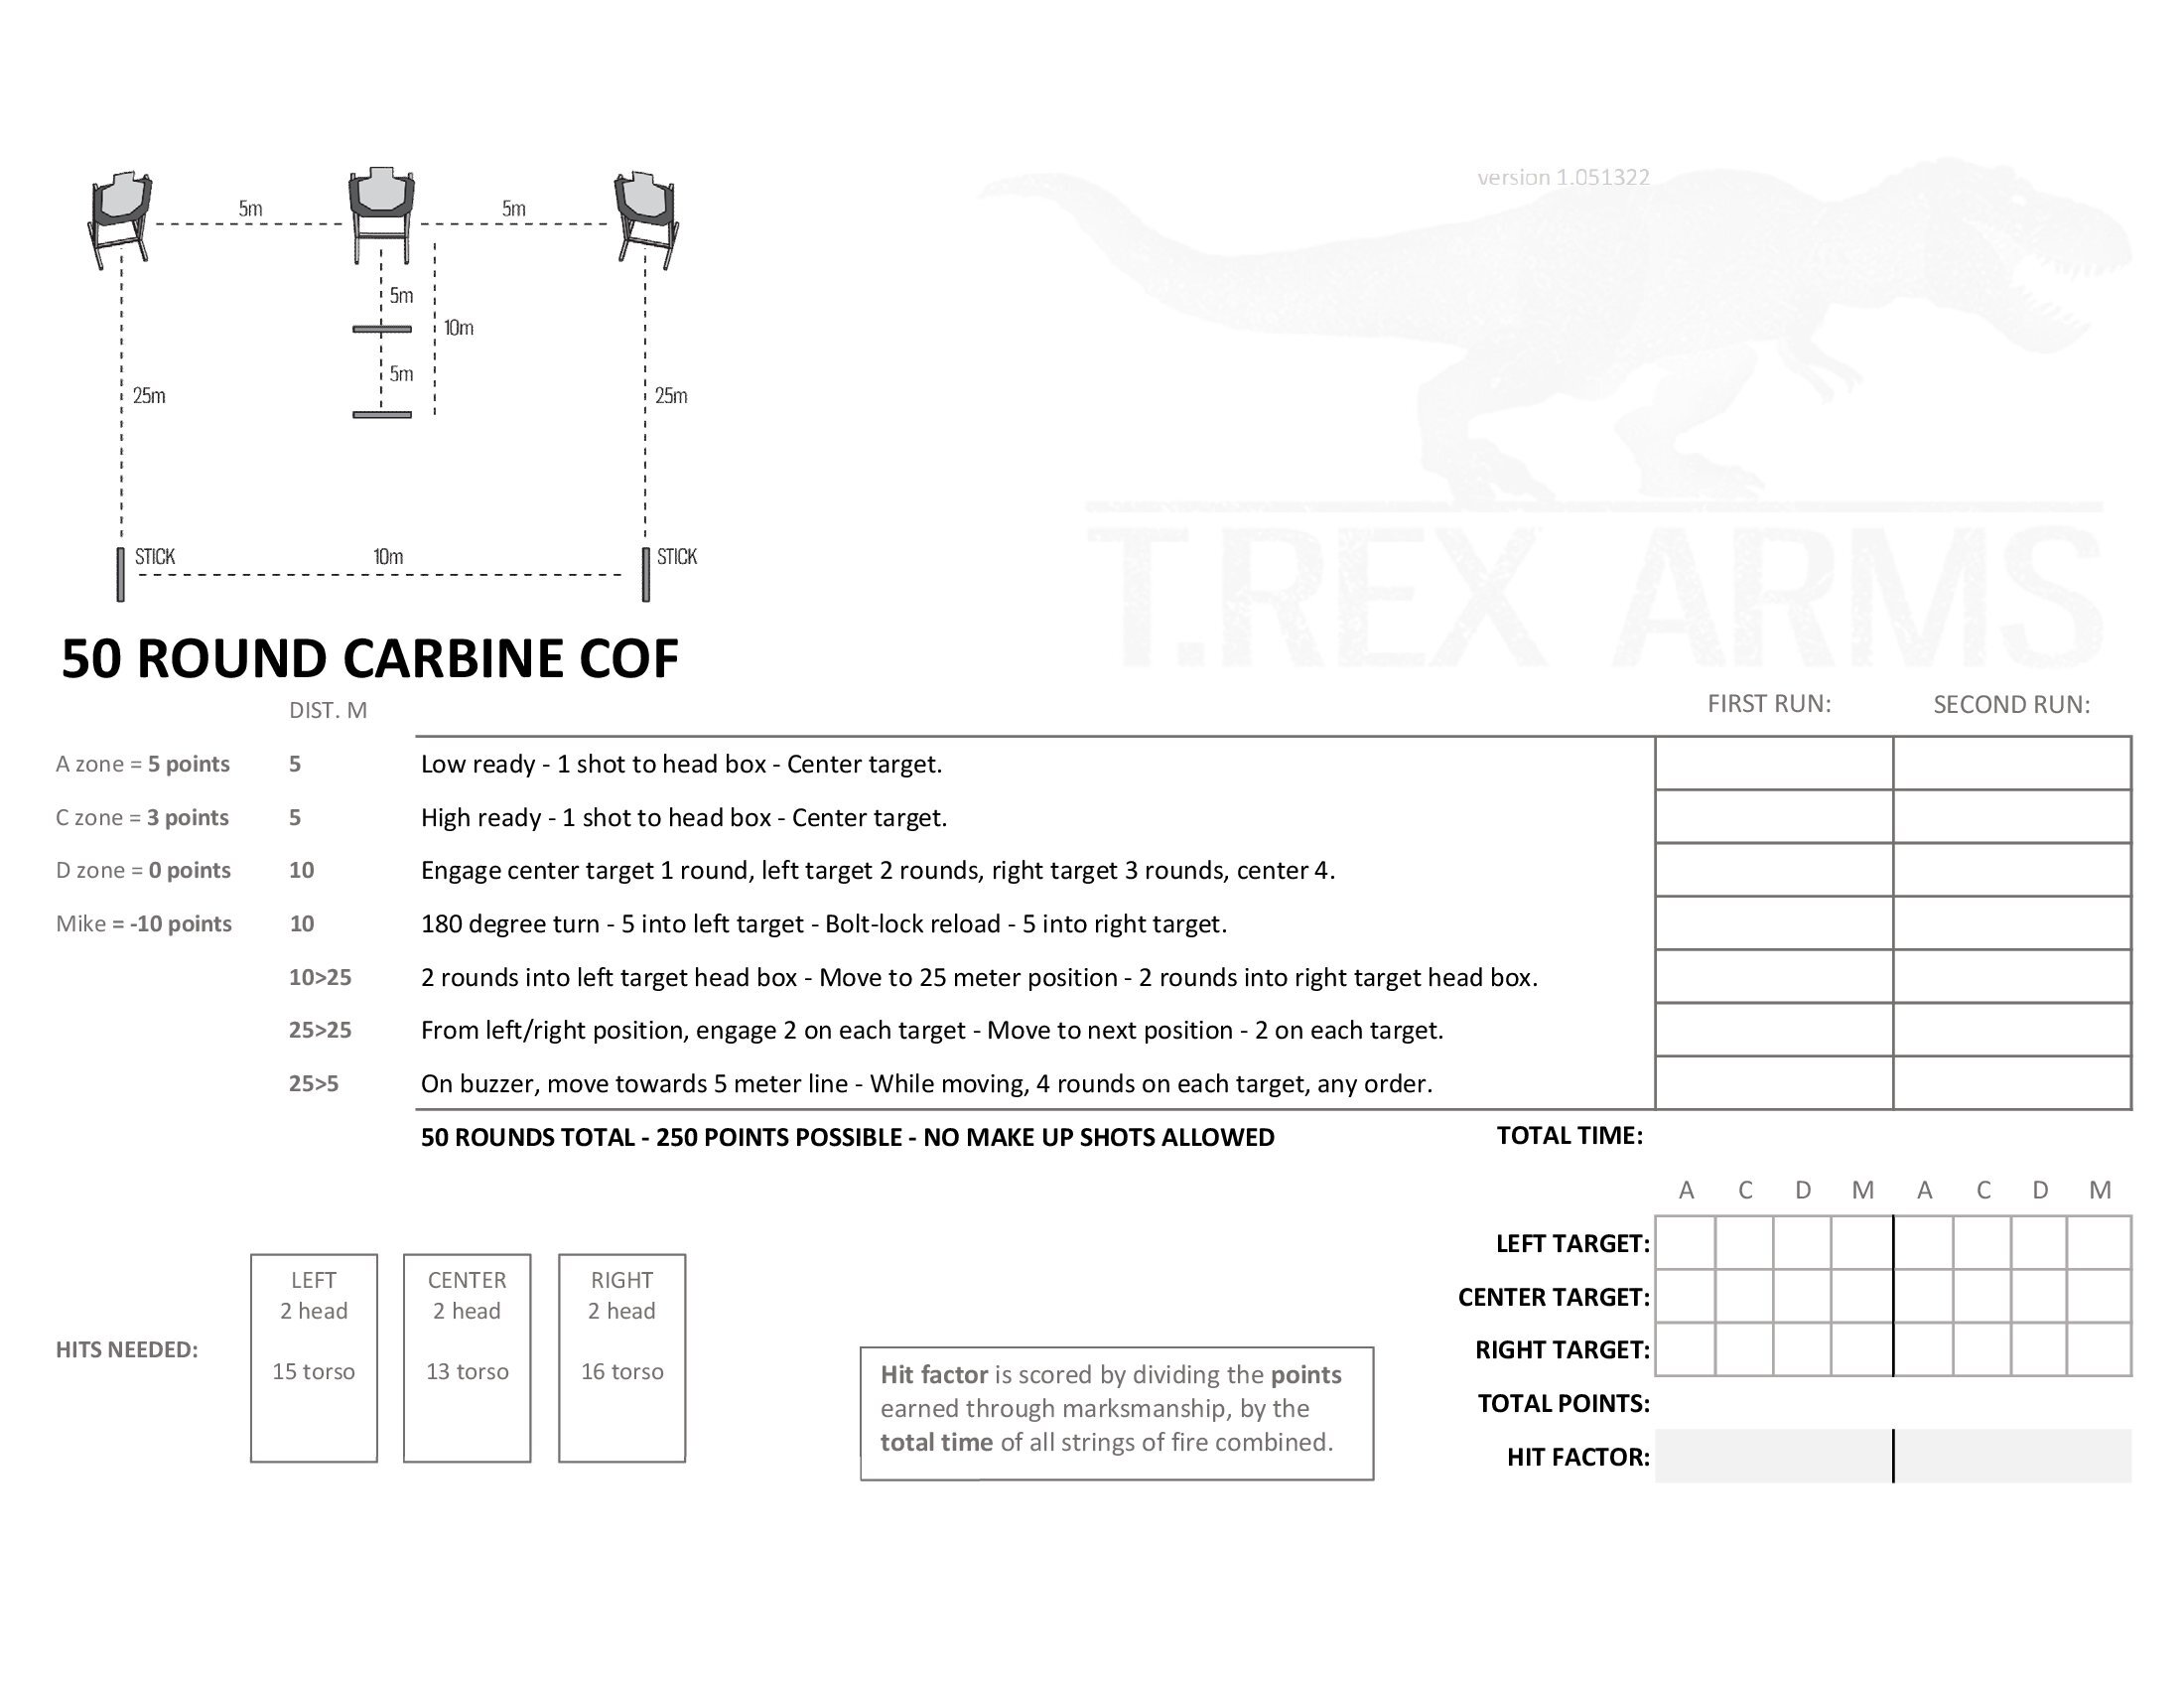 50 Round Carbine COF print-out